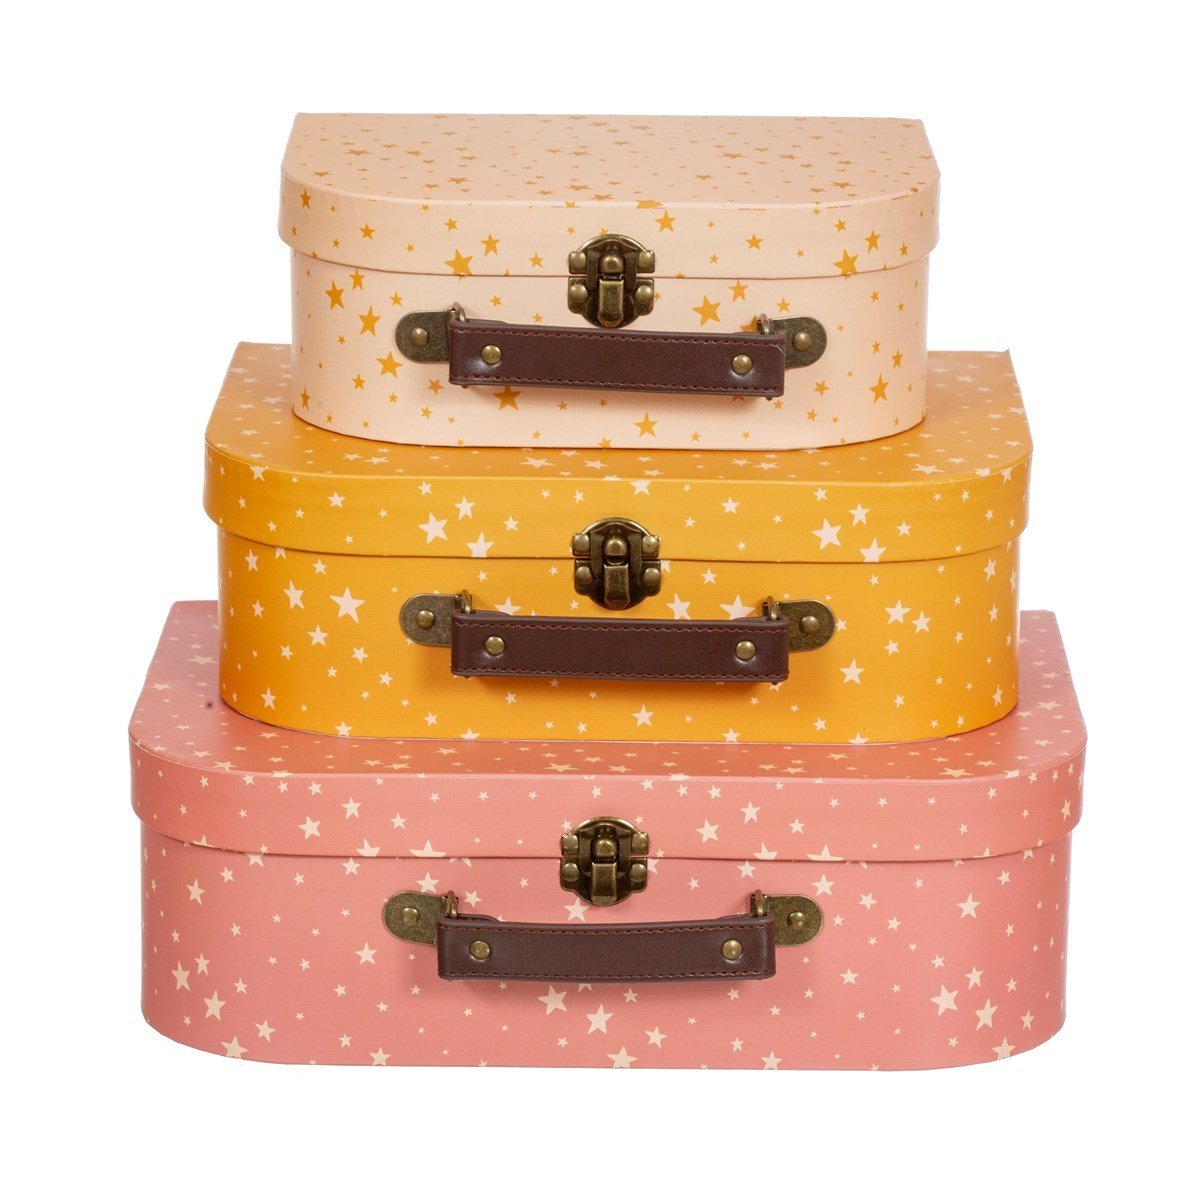 View Little Stars Suitcases Set of 3 information